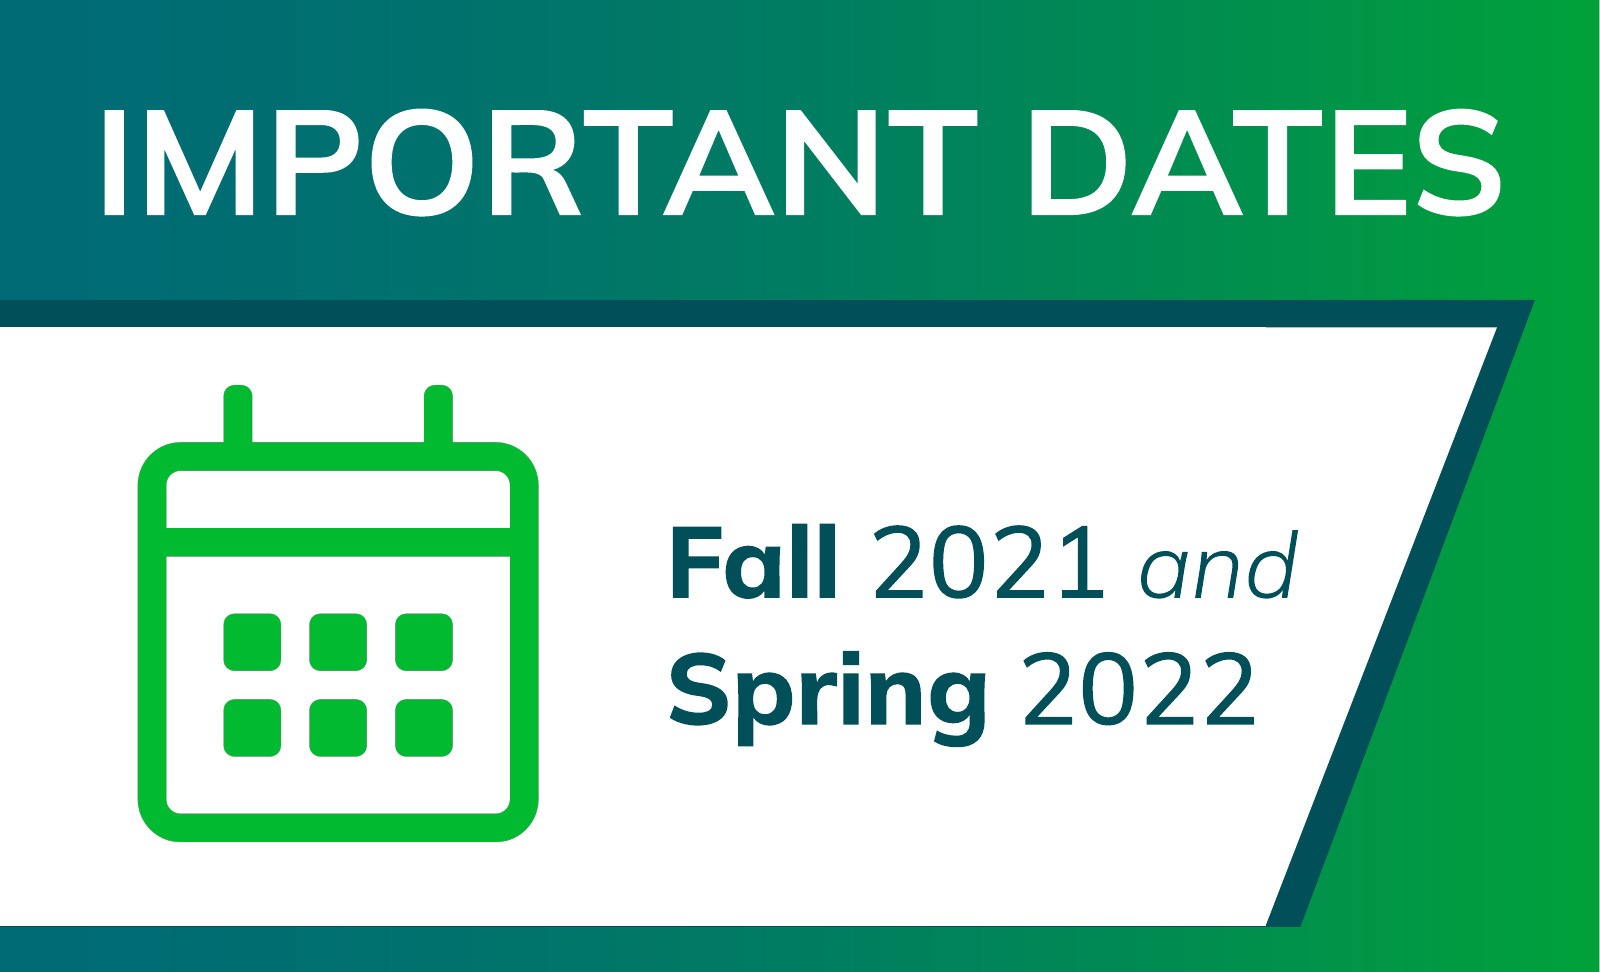 Important Dates Fall 2021 and Spring 2022